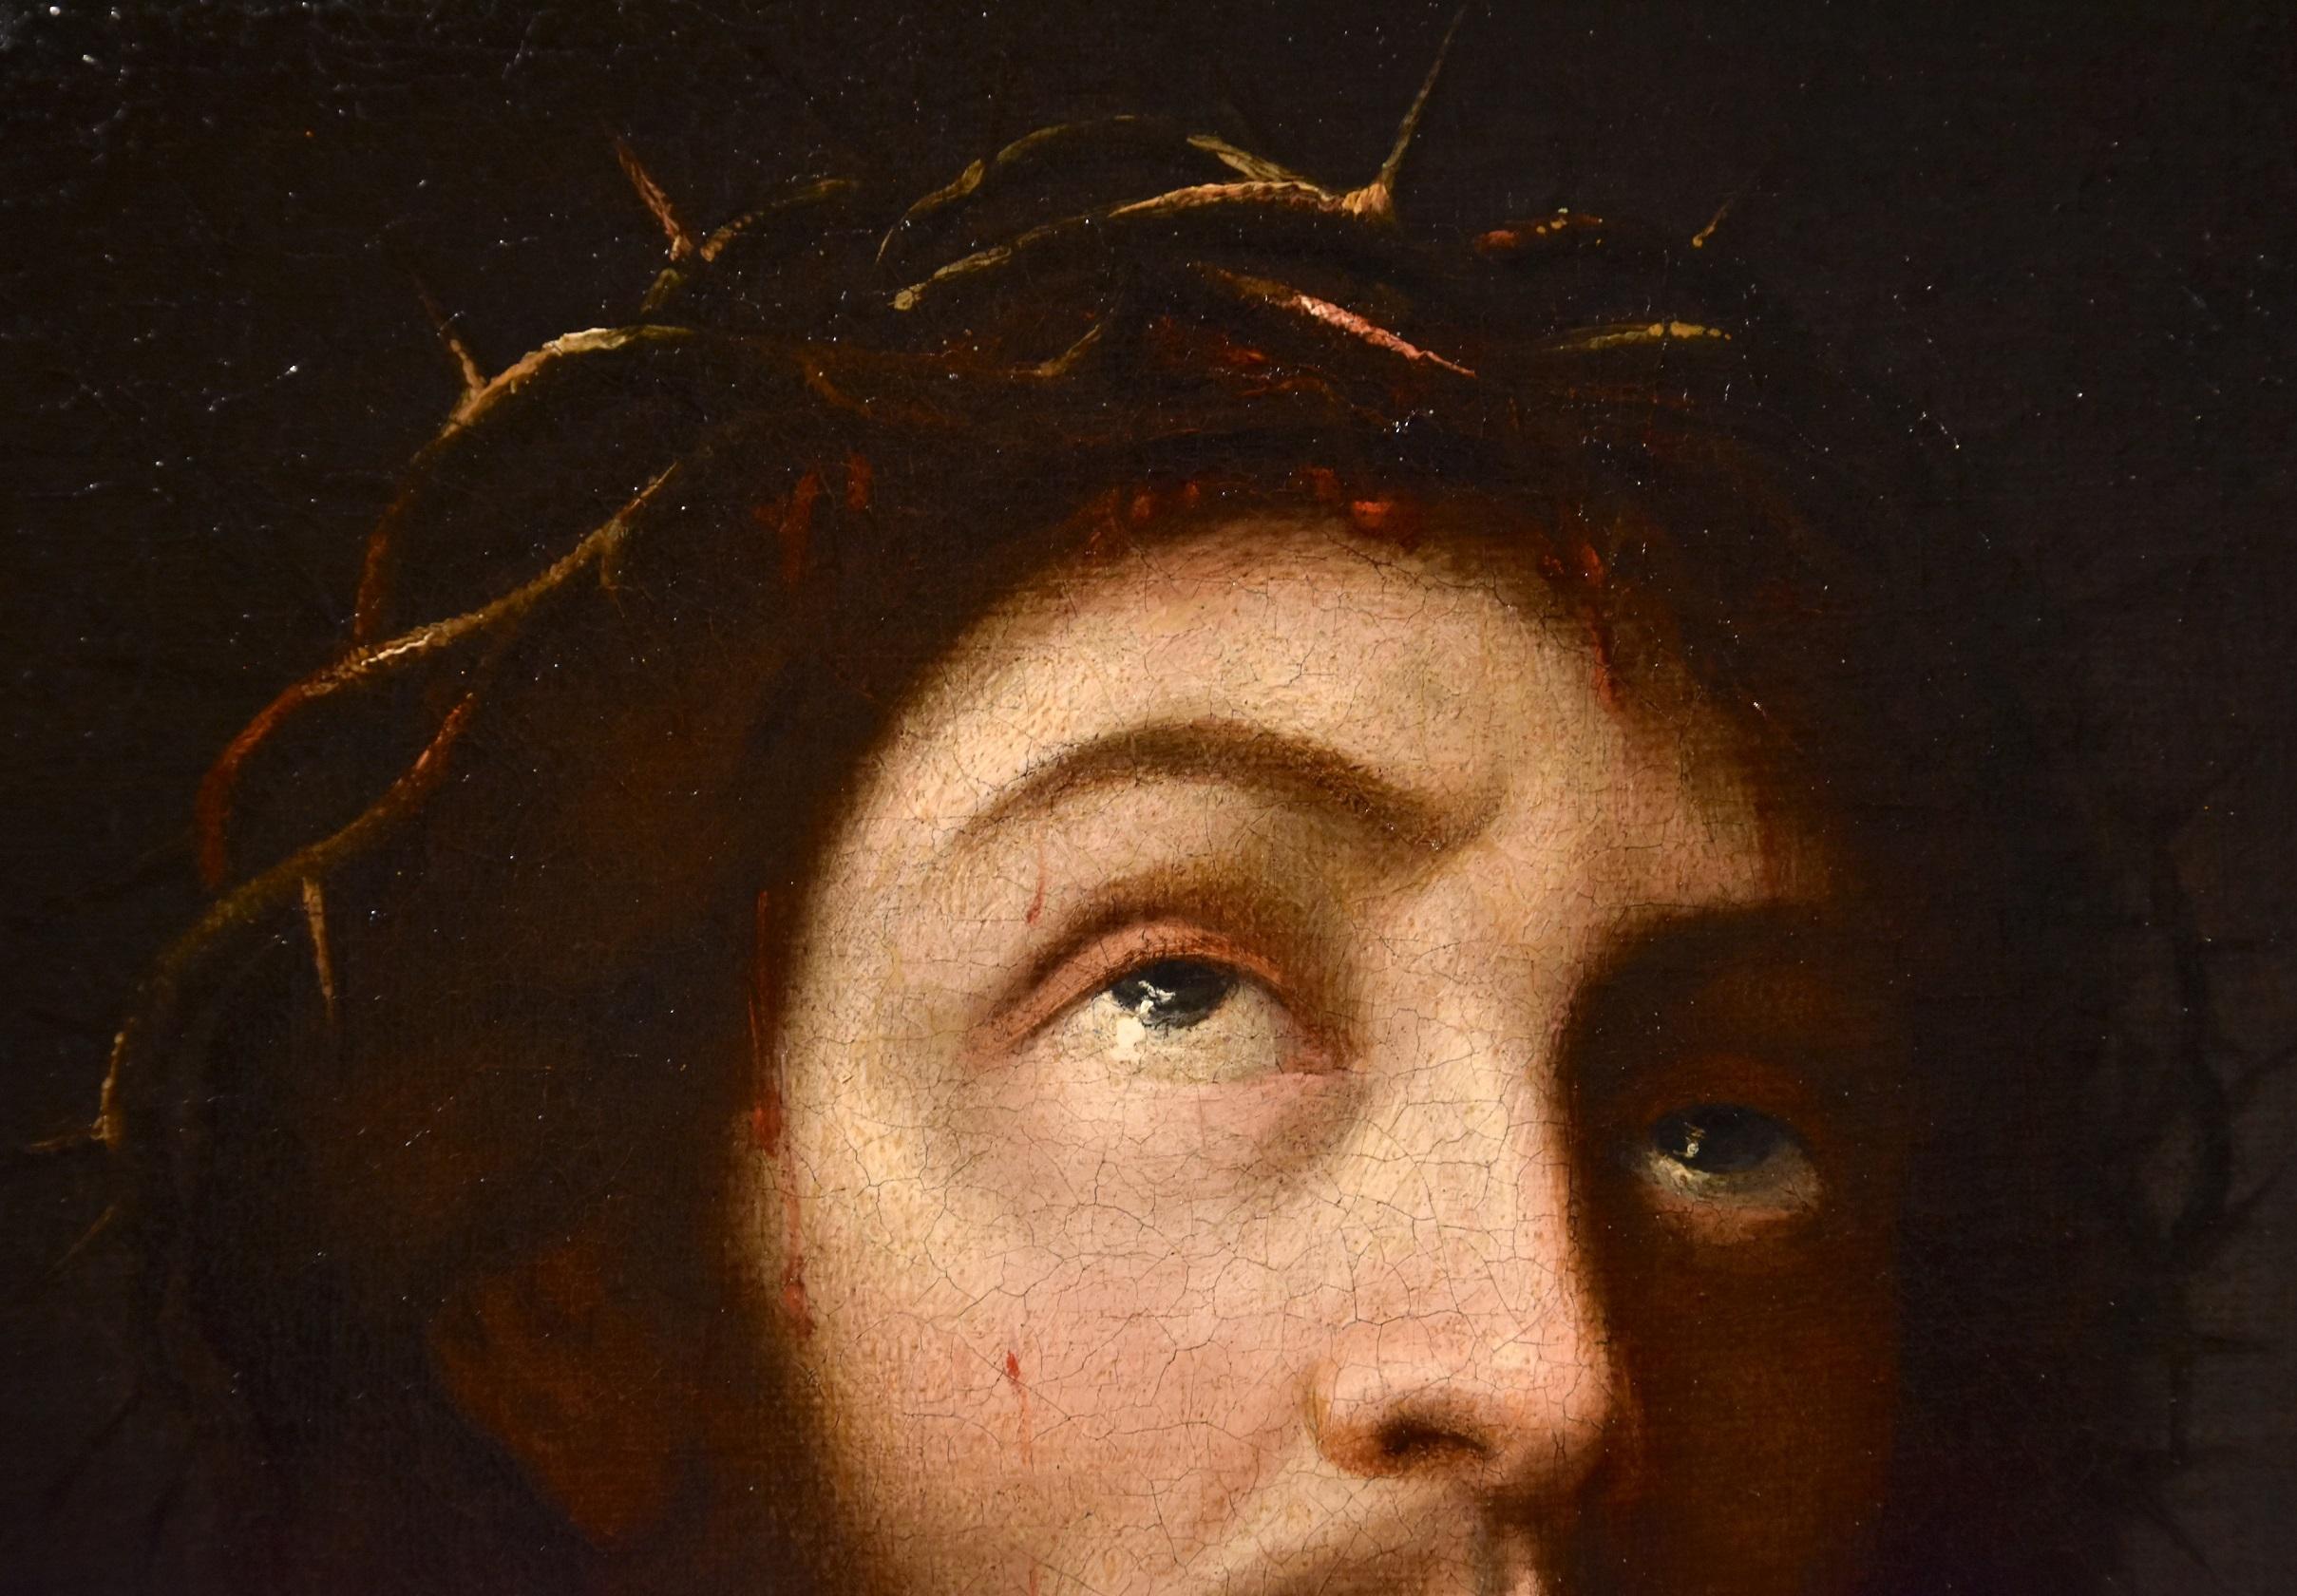 Ecce Homo Christ Paint Oil on canvas 17th Century Old master Leonardo Italian  - Old Masters Painting by Lombard painter of the 17th century